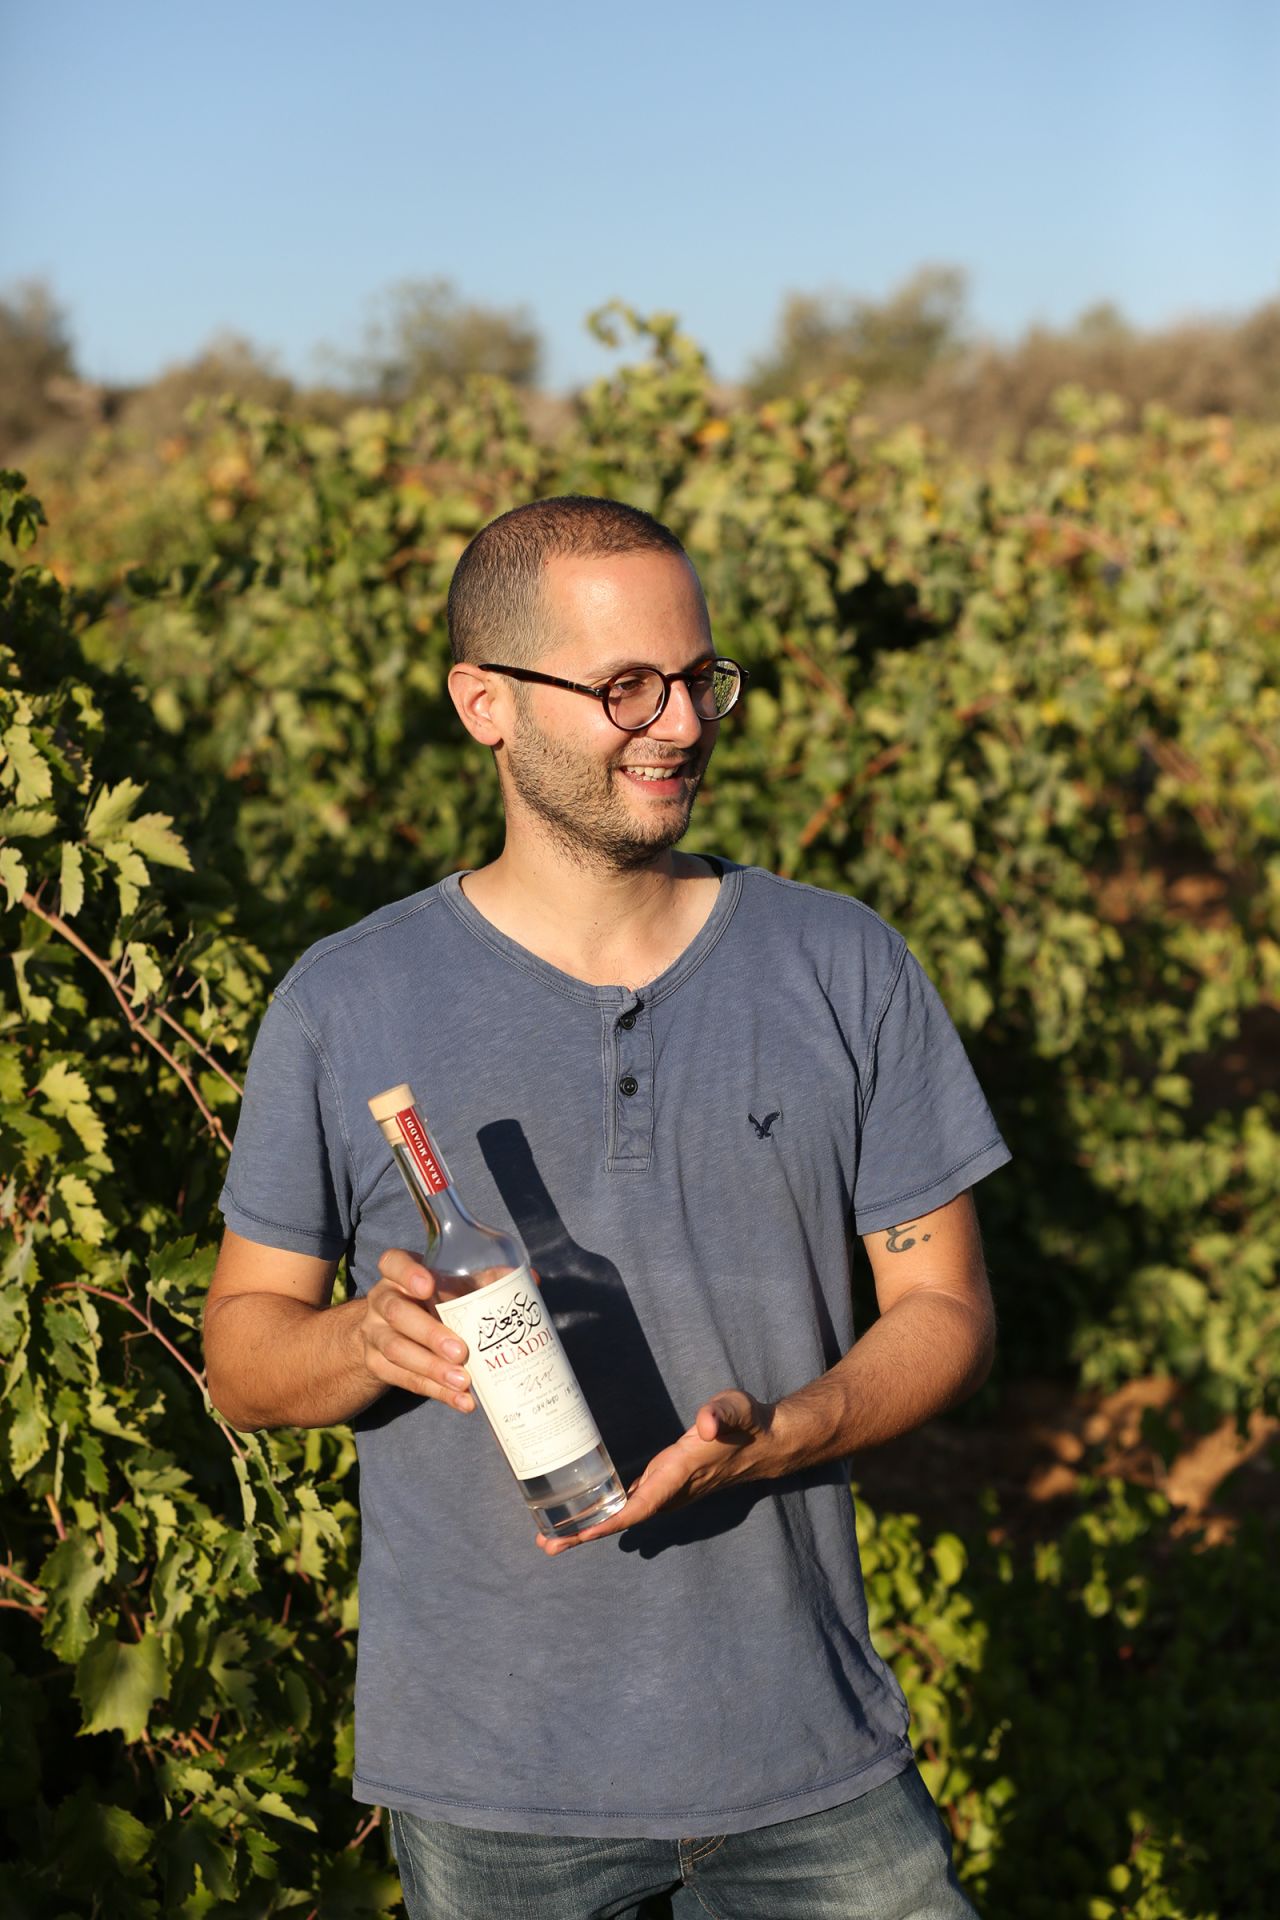 The Middle East has "a very rich history of making wine and spirits, and it's about time that we share it with the world," says Nader Muaddi.